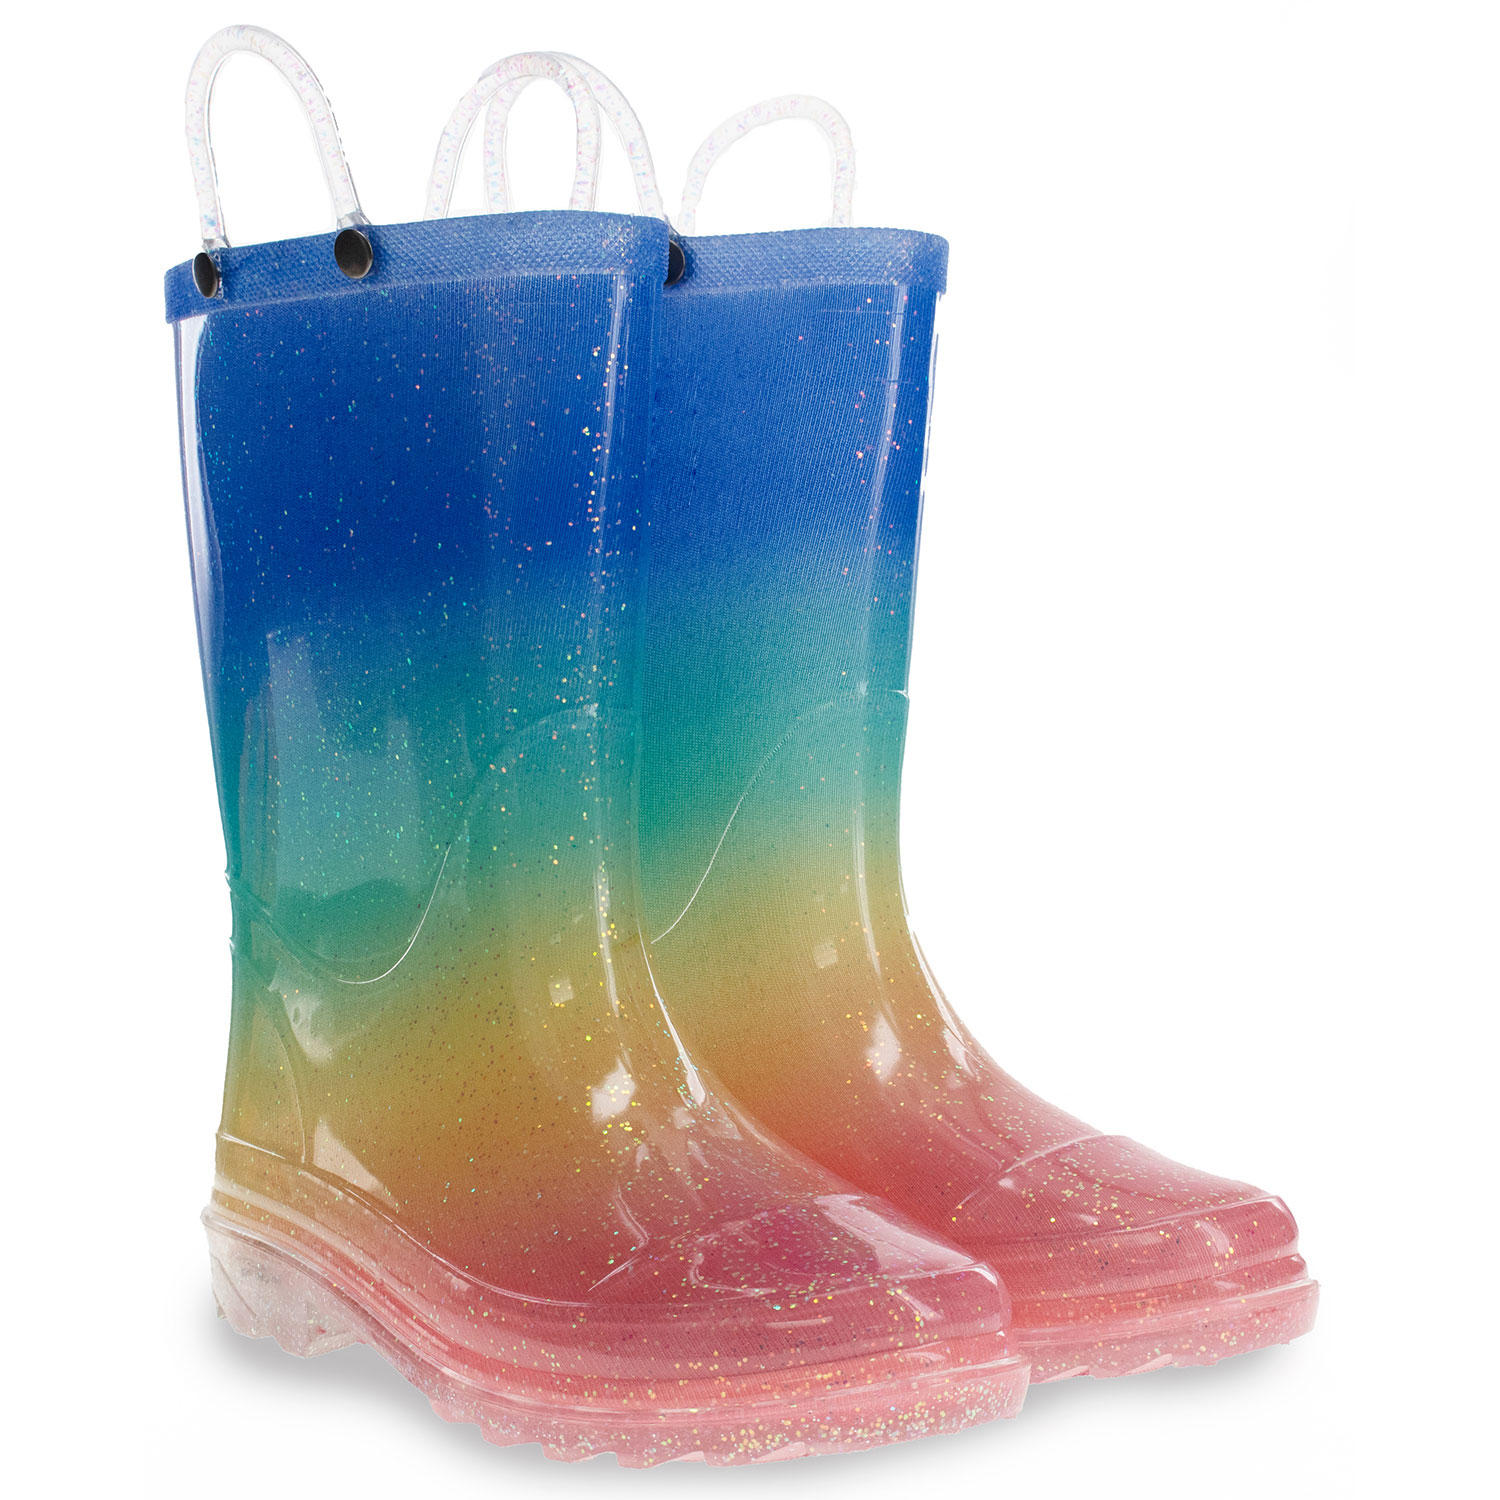 Kids Rain Boots at Sam's Club for Back to School - Deals under $10!